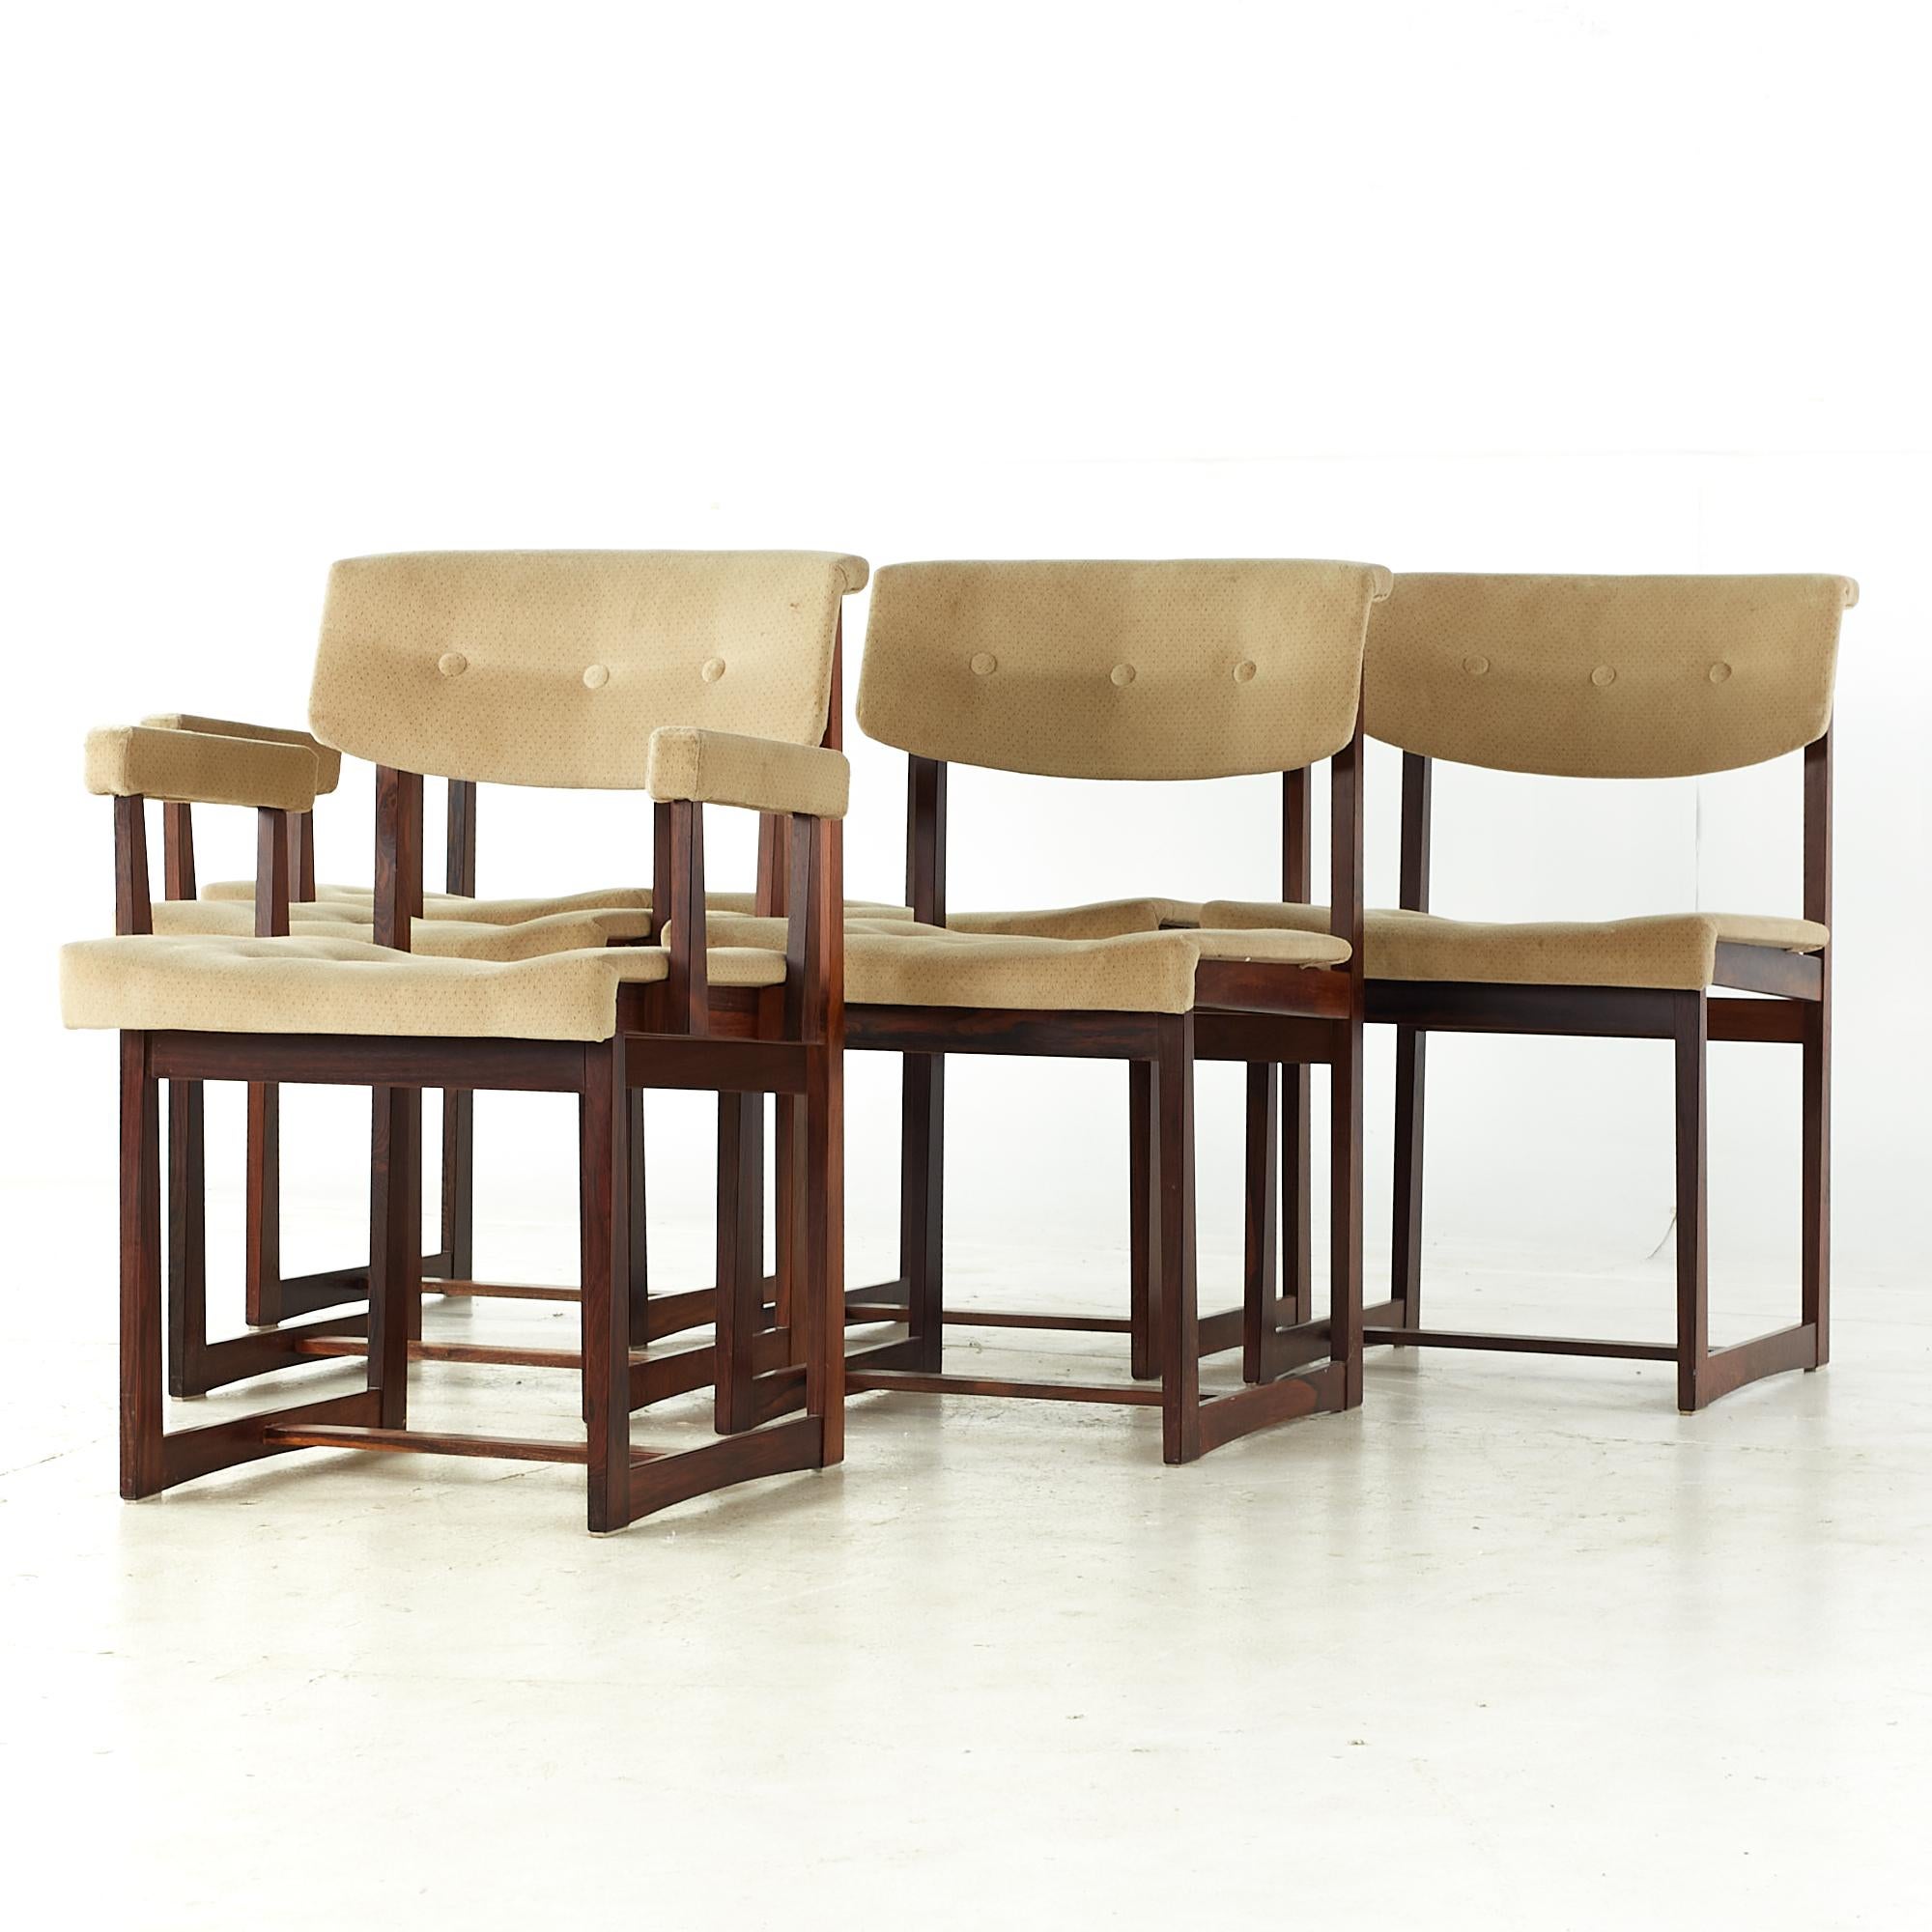 Mid-Century Modern Art Furn Midcentury Rosewood Dining Chairs, Set of 6 For Sale